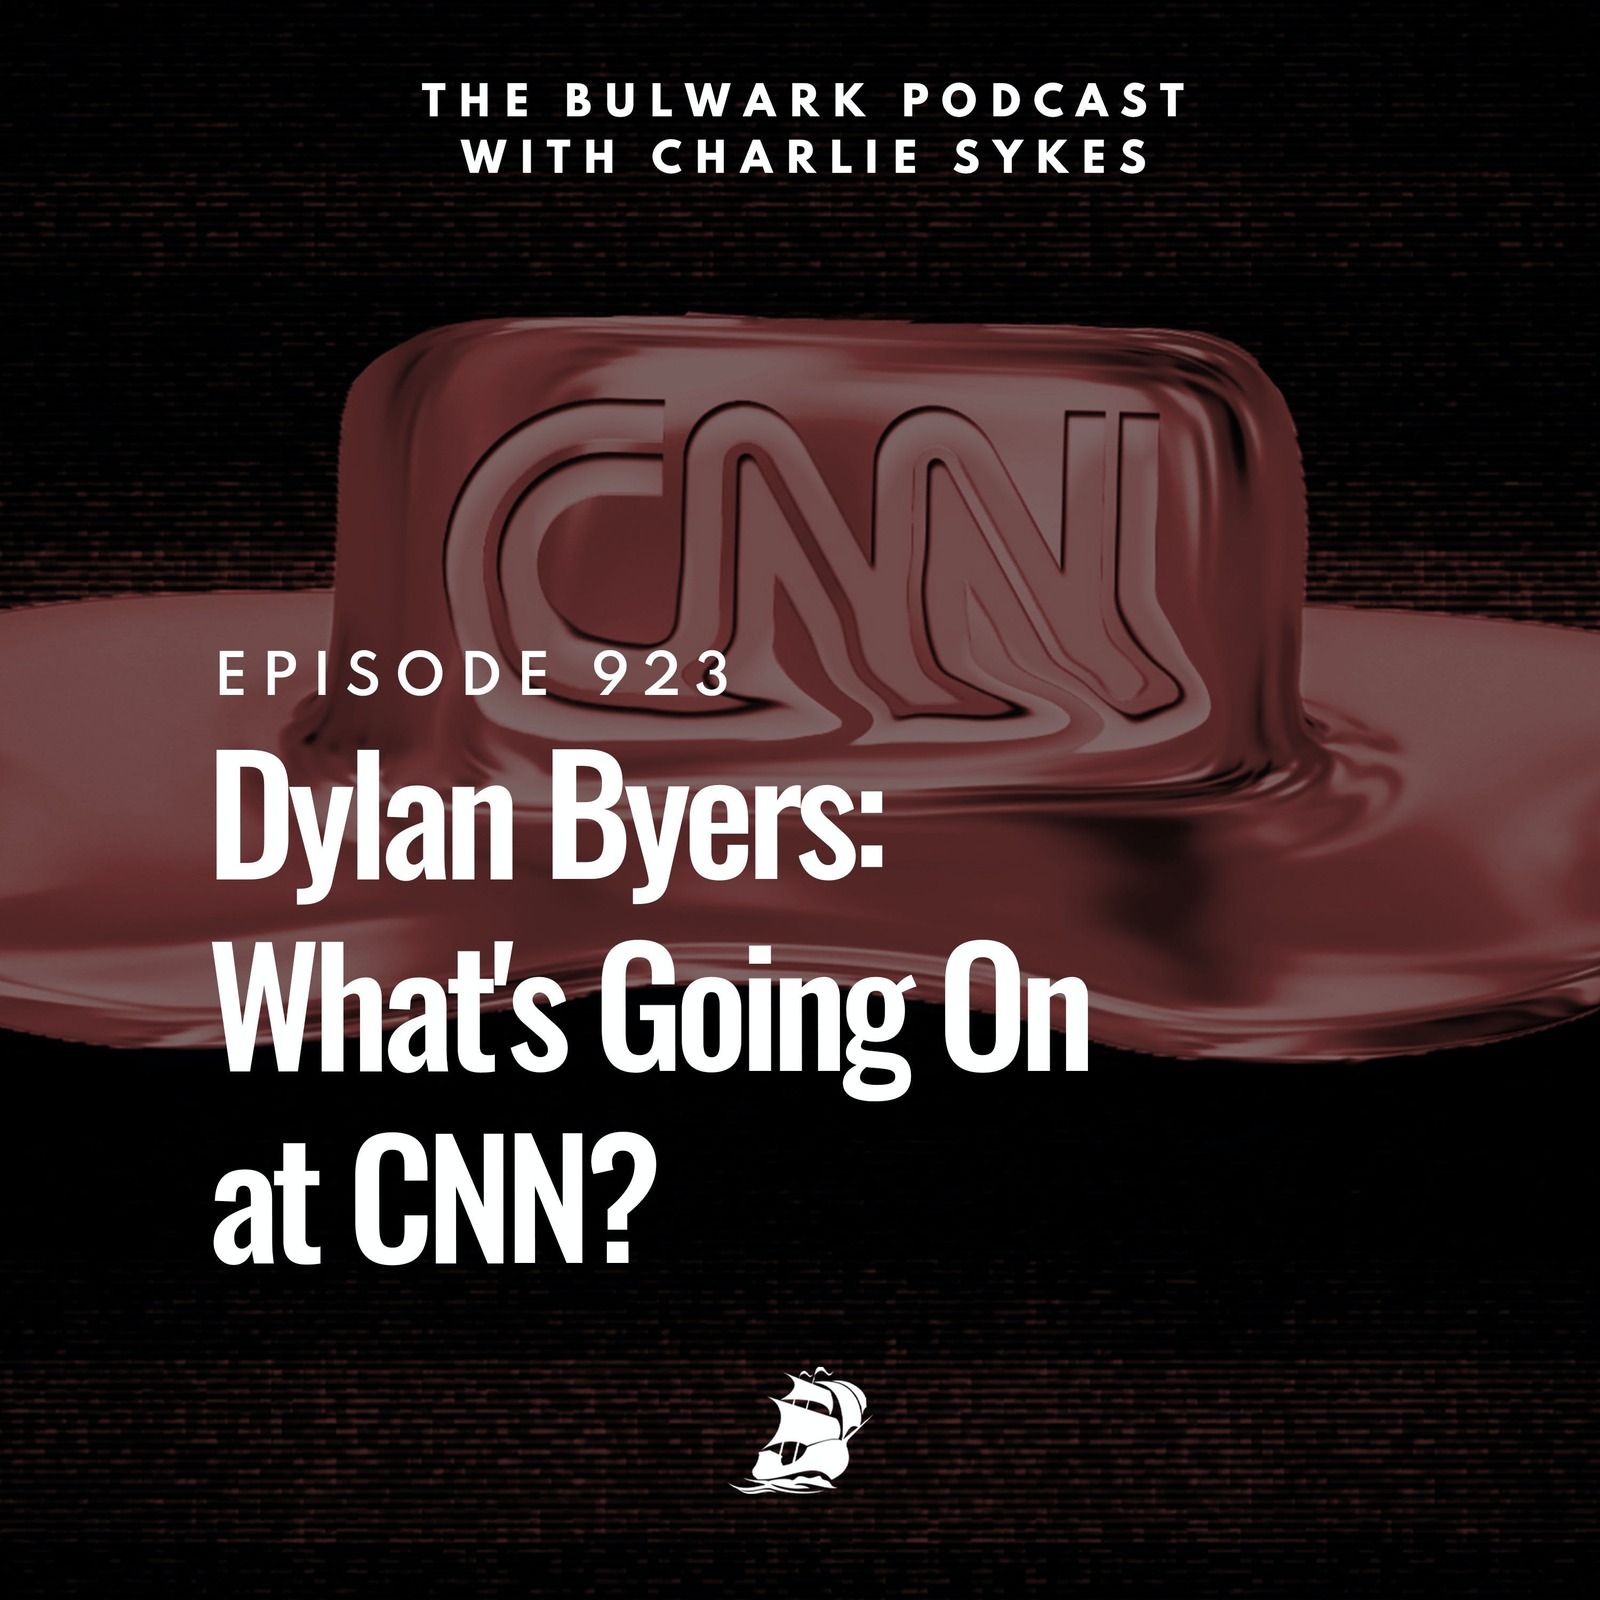 Dylan Byers: What's Going On at CNN? by The Bulwark Podcast